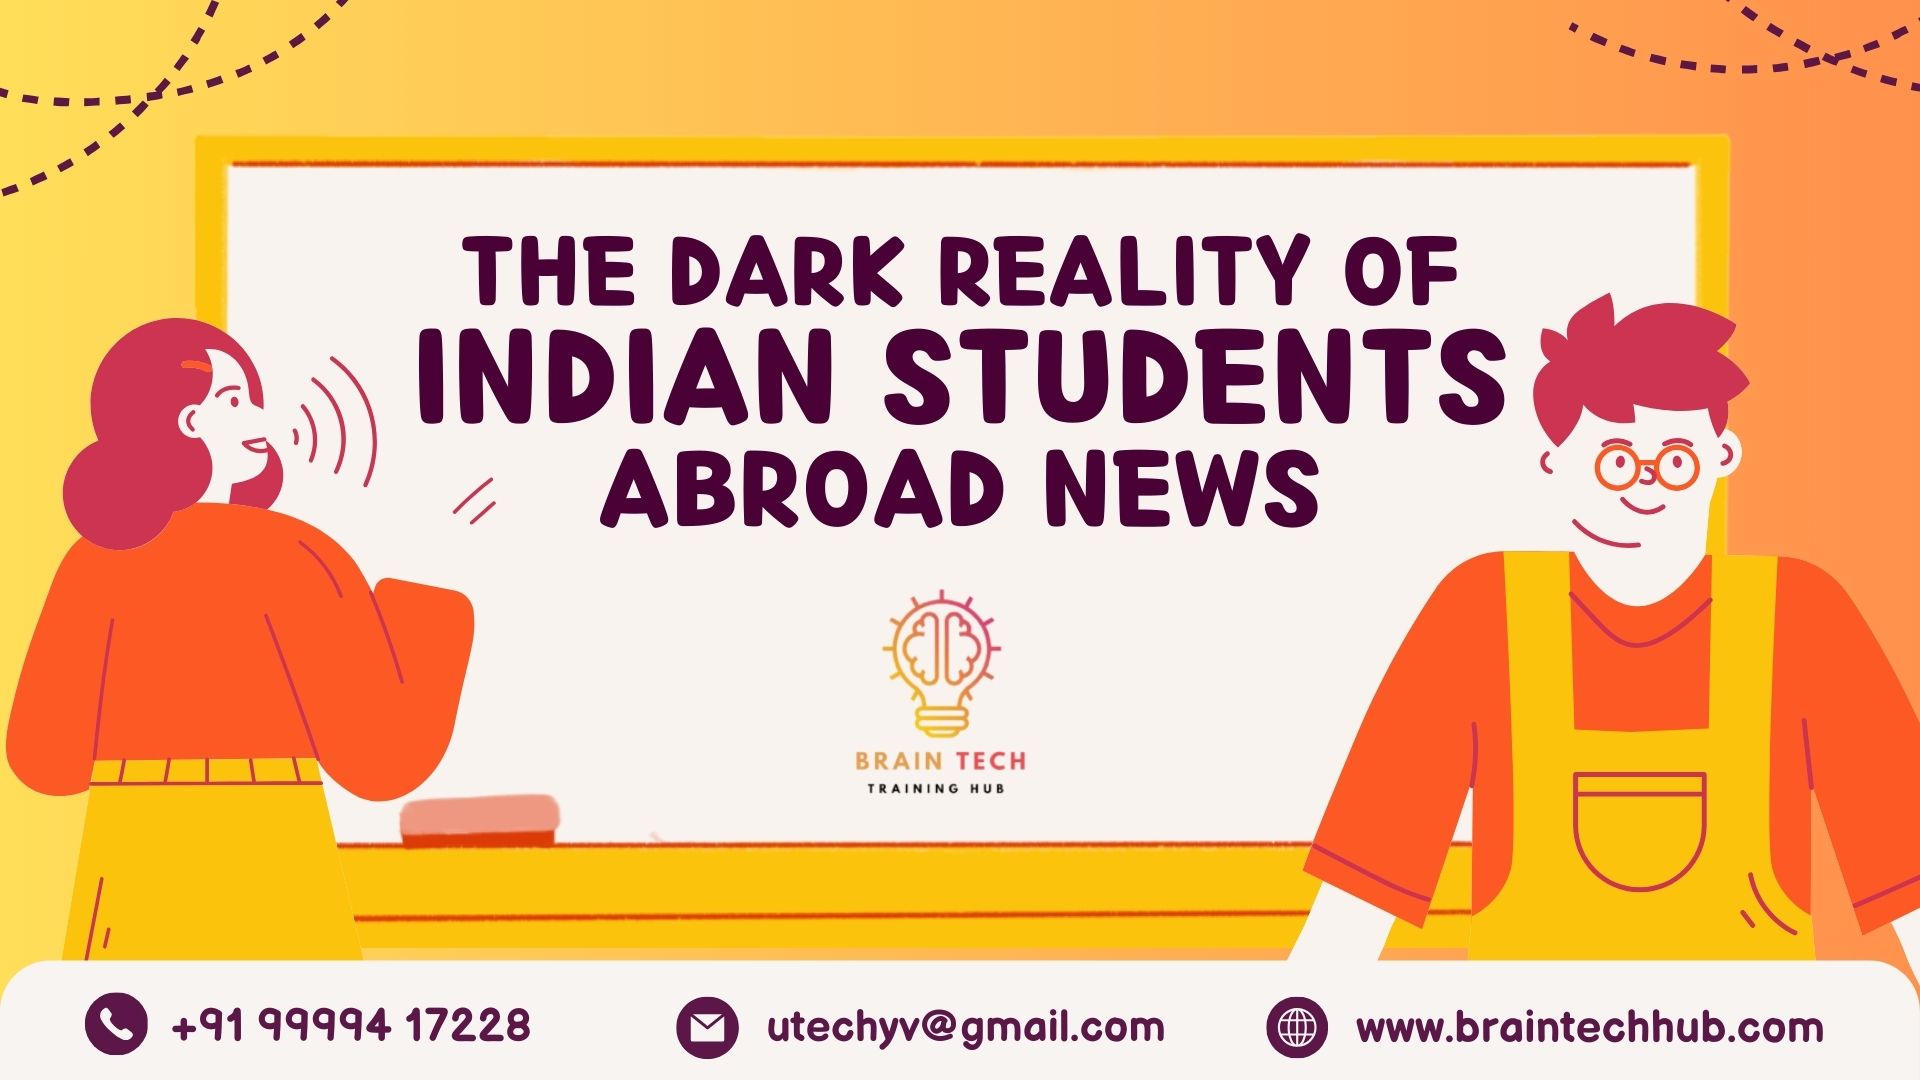 The Dark Reality of Indian Students Abroad News